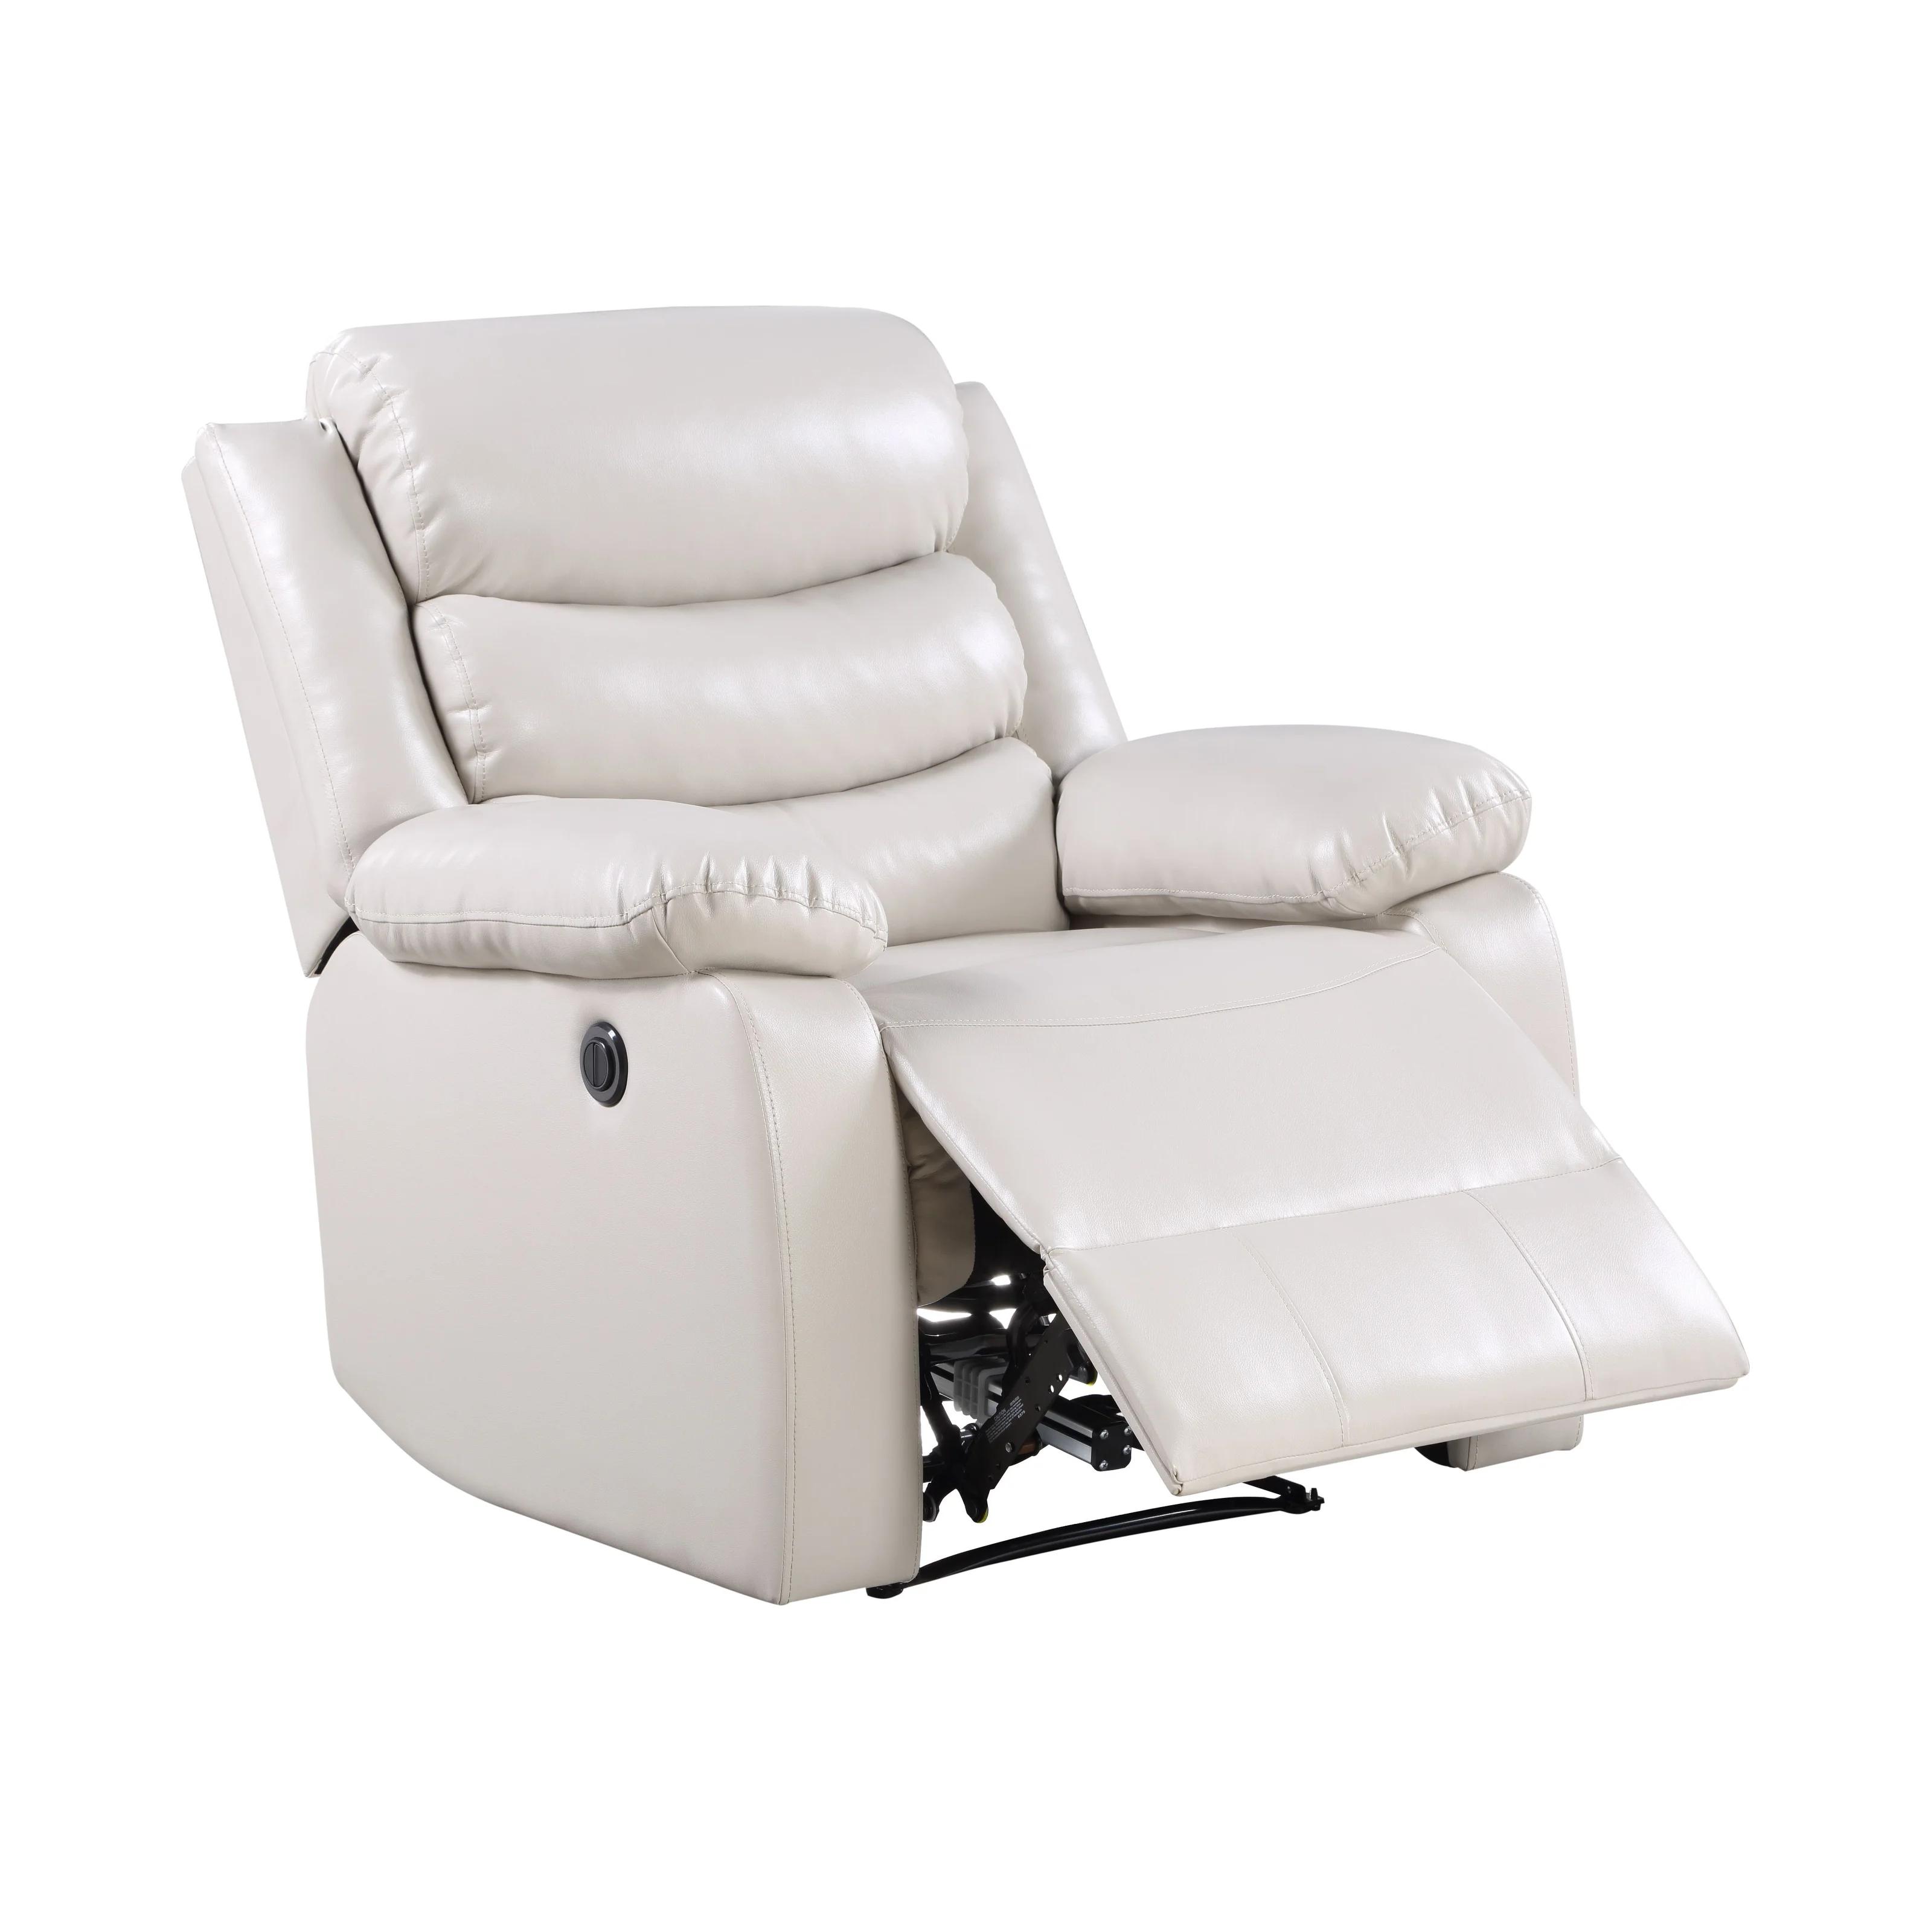 Contemporary Recliner Eilbra 56911 in White Faux Leather